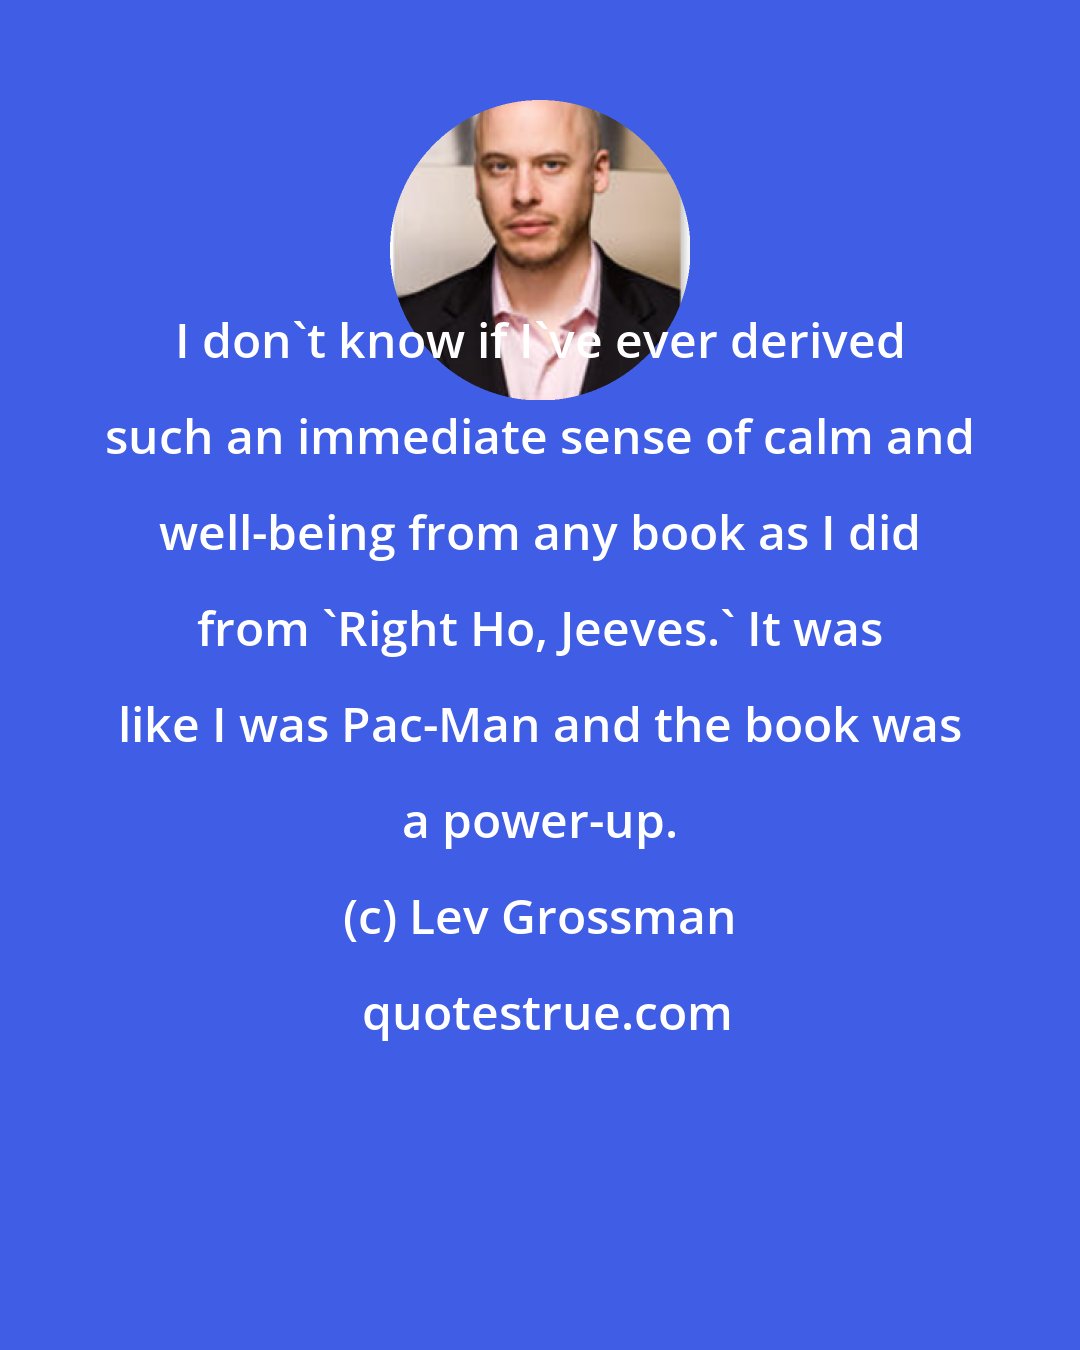 Lev Grossman: I don't know if I've ever derived such an immediate sense of calm and well-being from any book as I did from 'Right Ho, Jeeves.' It was like I was Pac-Man and the book was a power-up.